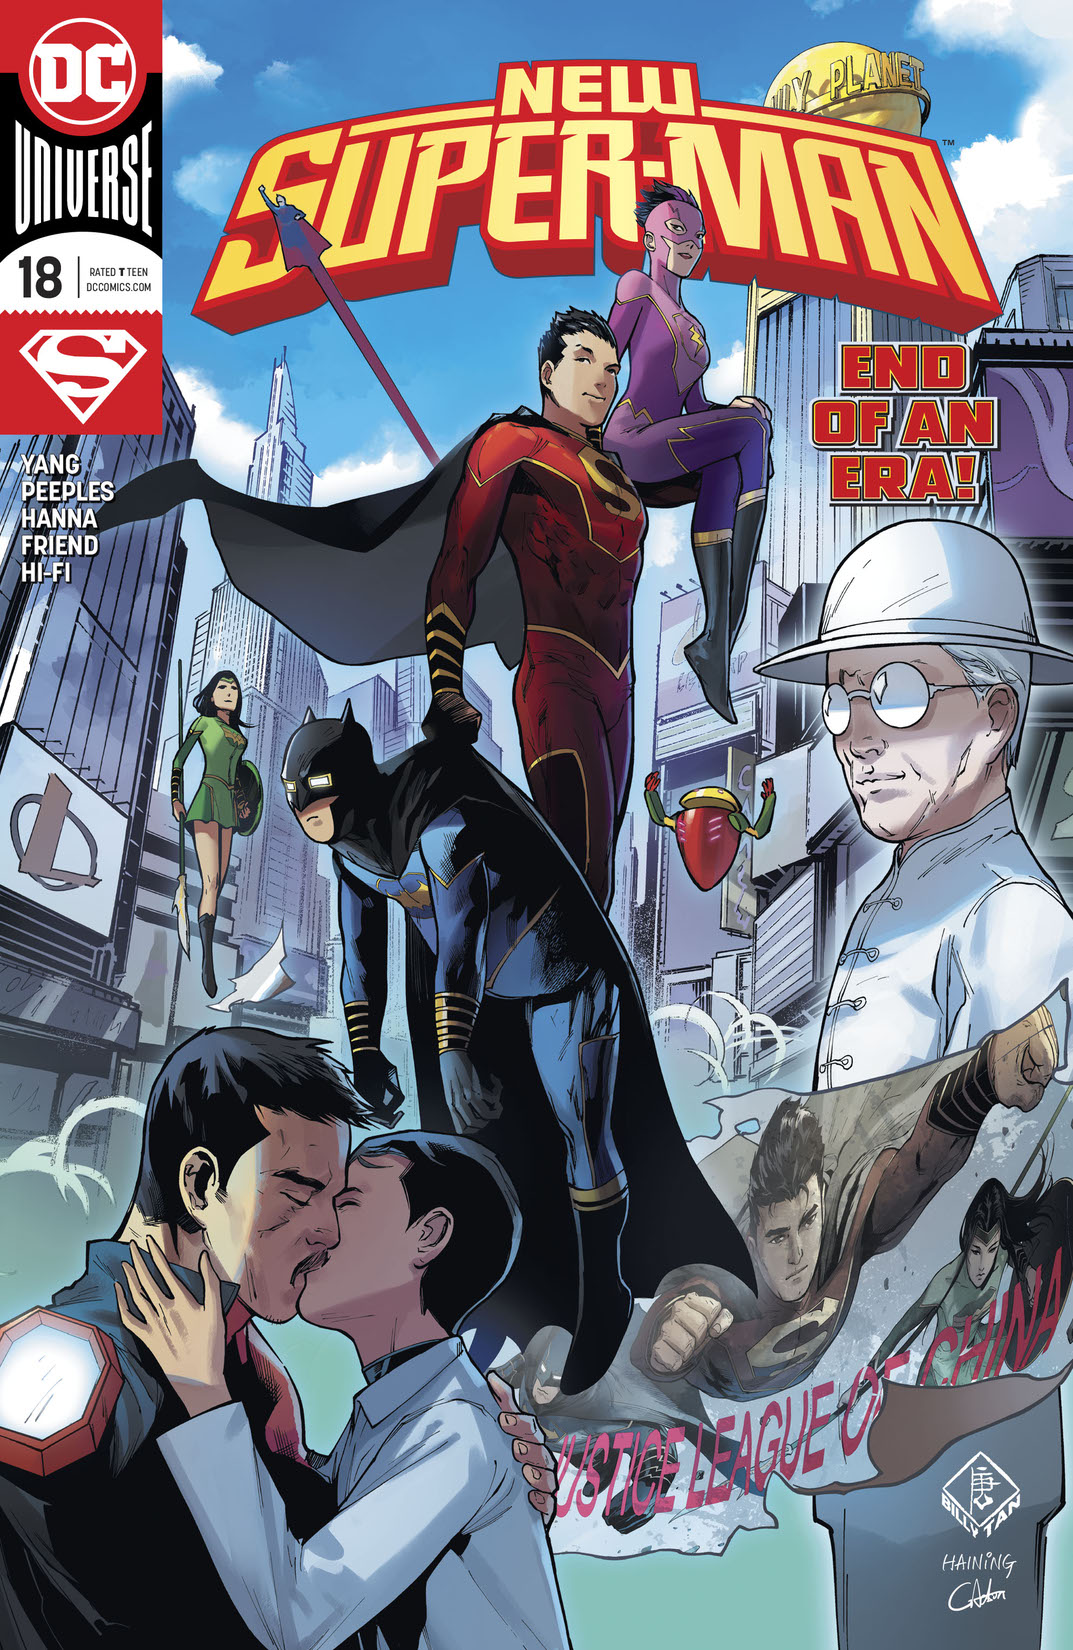 New Super-Man #18 preview images